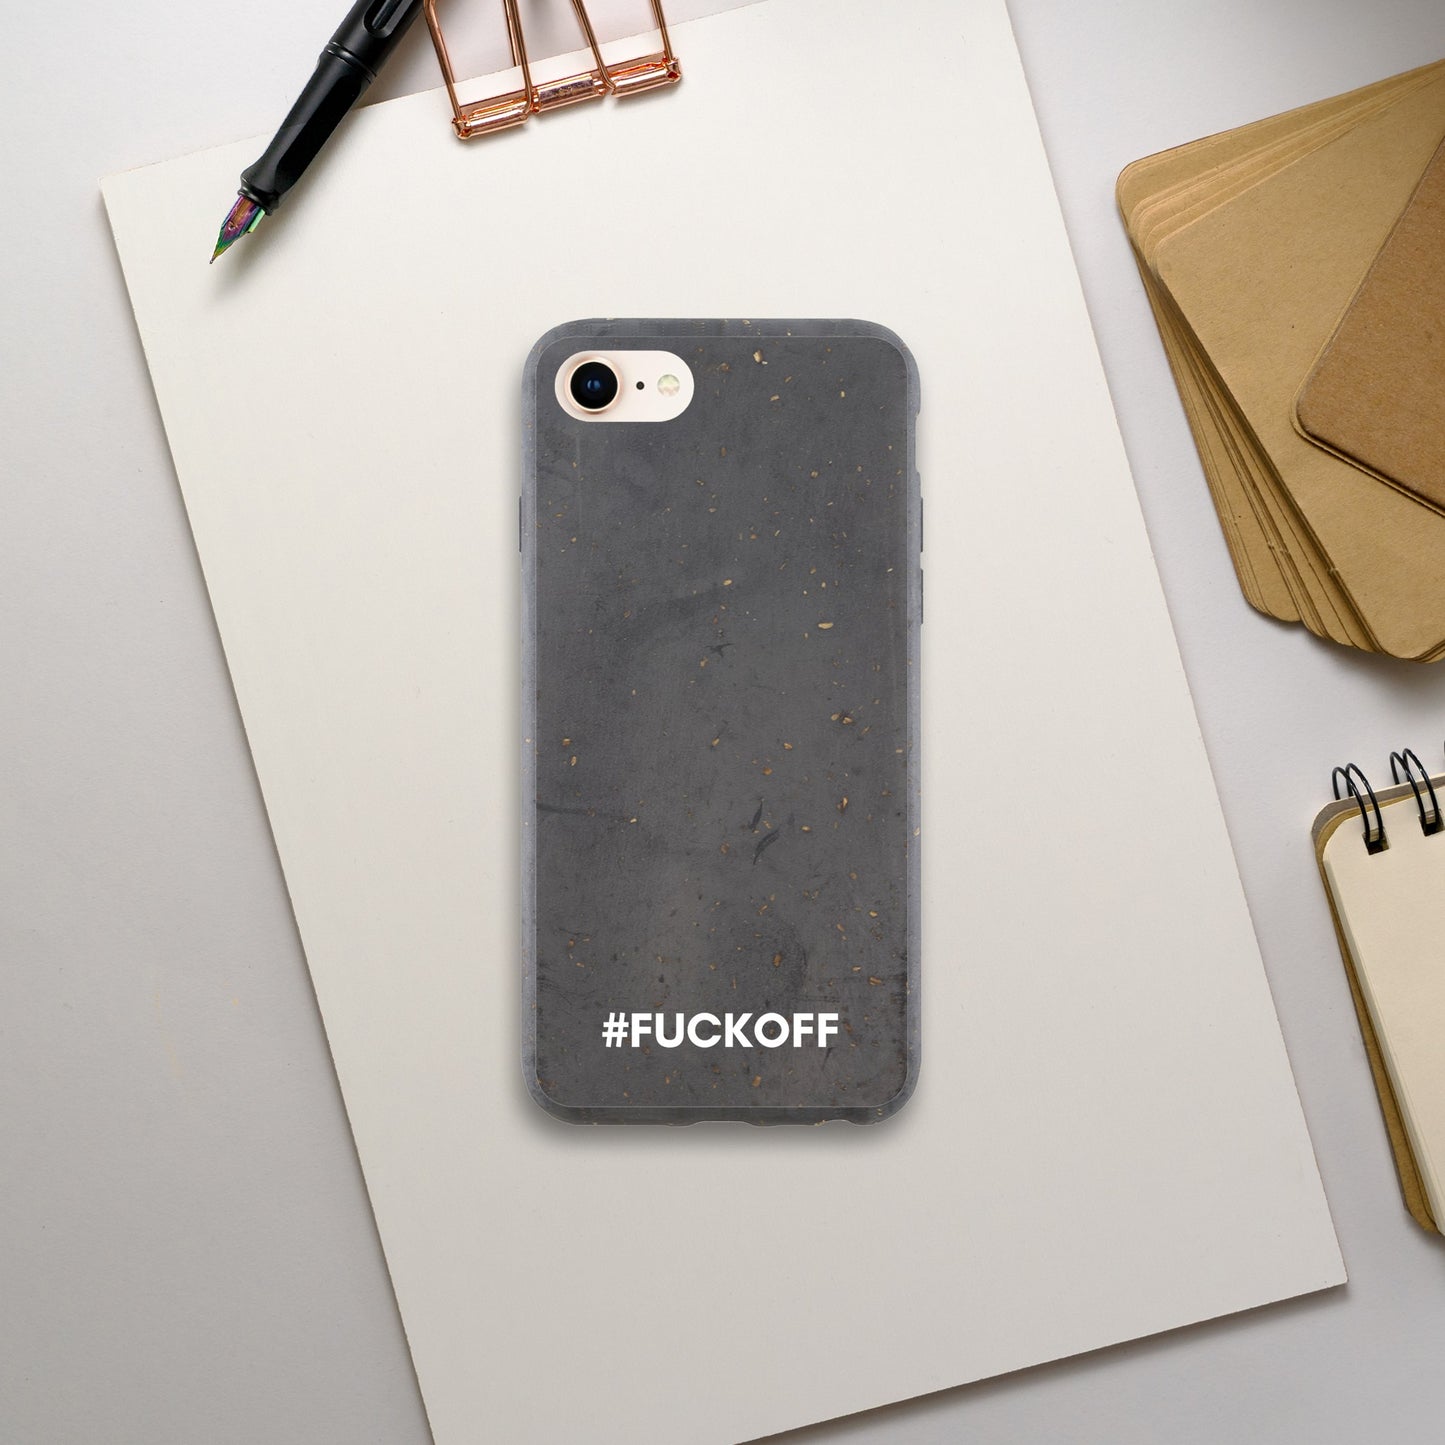 Cranky? Try this biodegradable phone case.